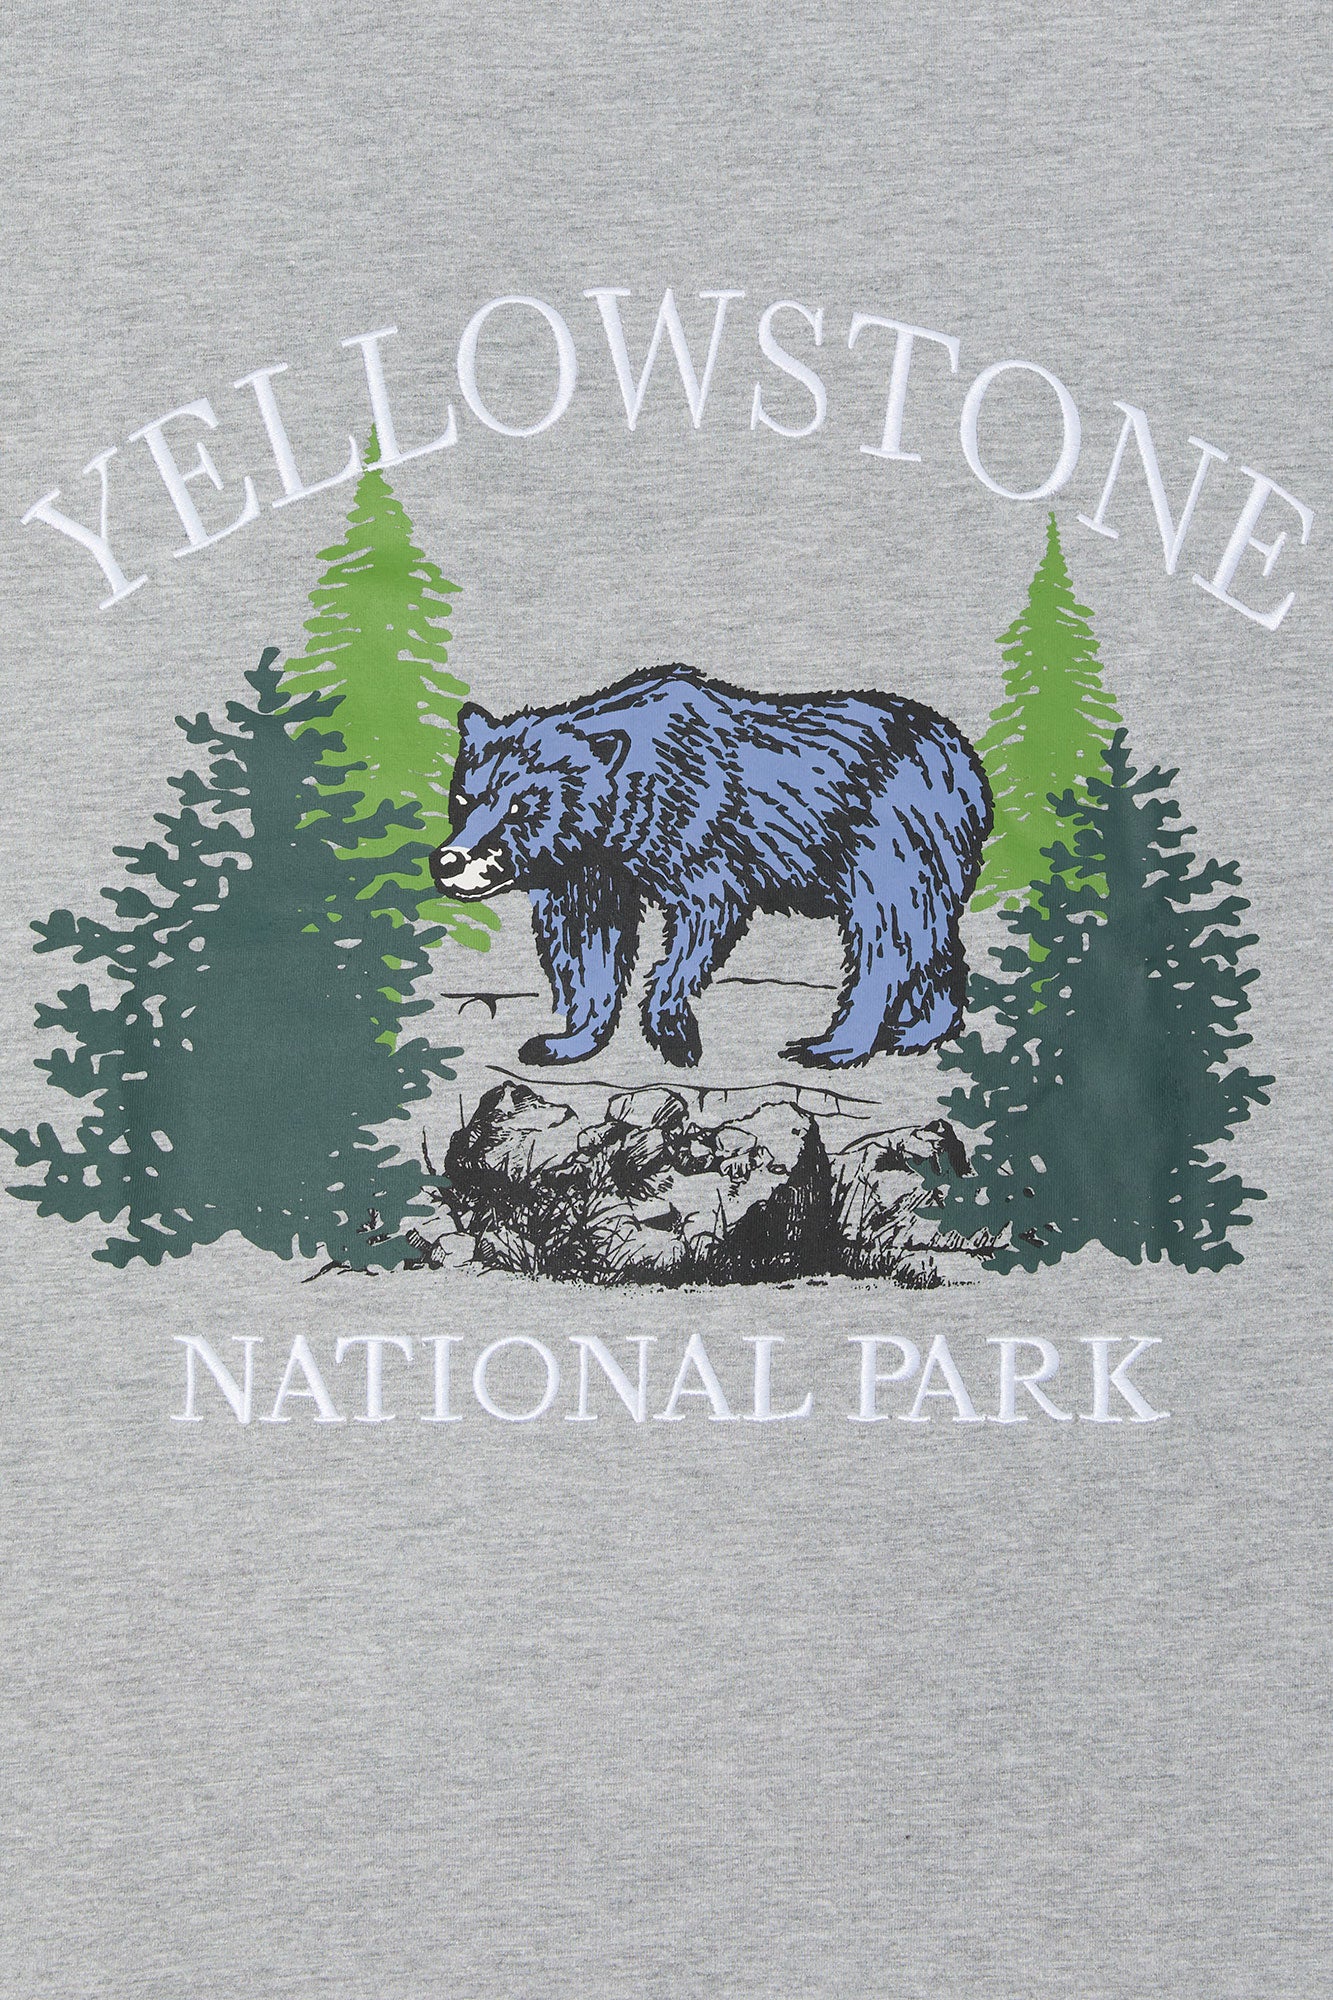 Yellowstone Embroidered Oversized T-Shirt